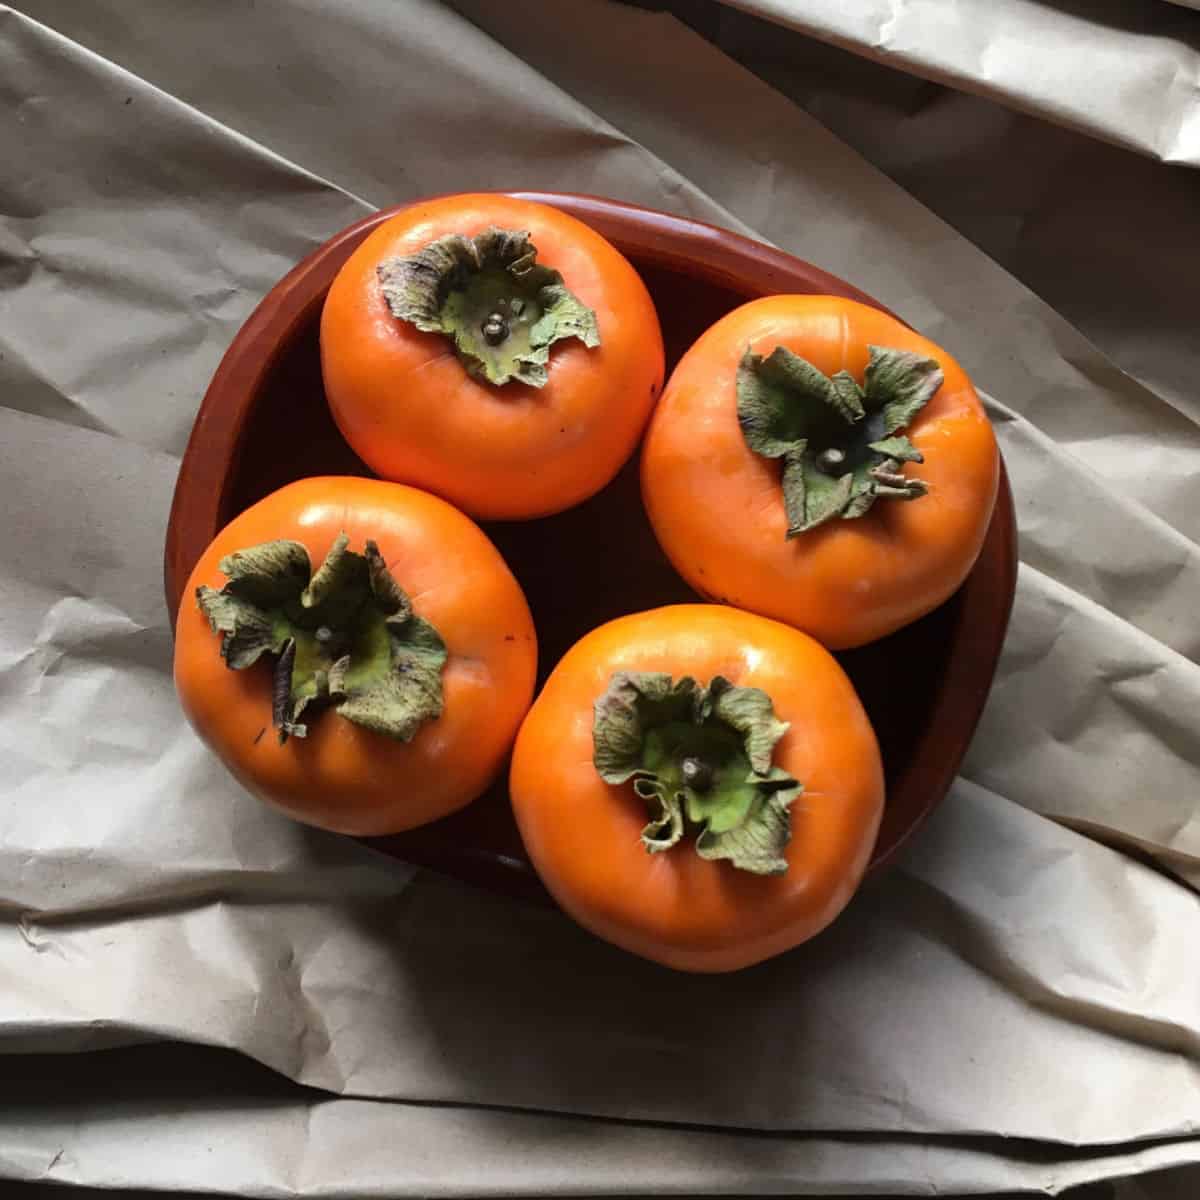 Four persimmons on a plate.